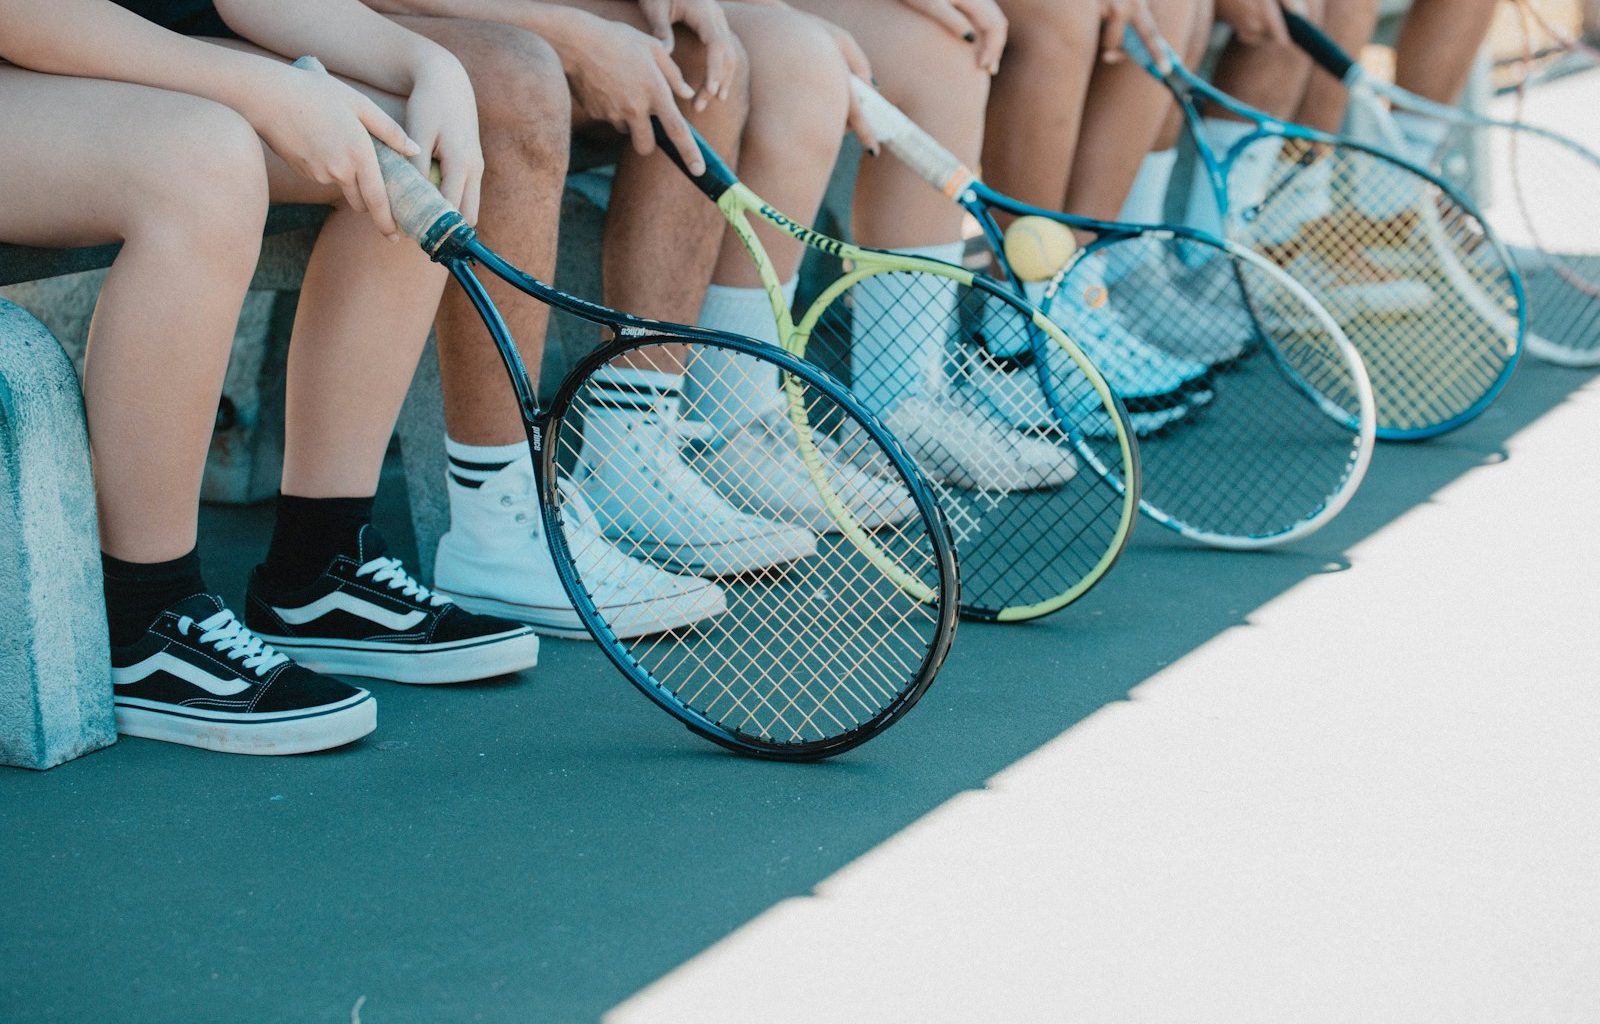 person in black and white nike sneakers holding blue and white tennis racket